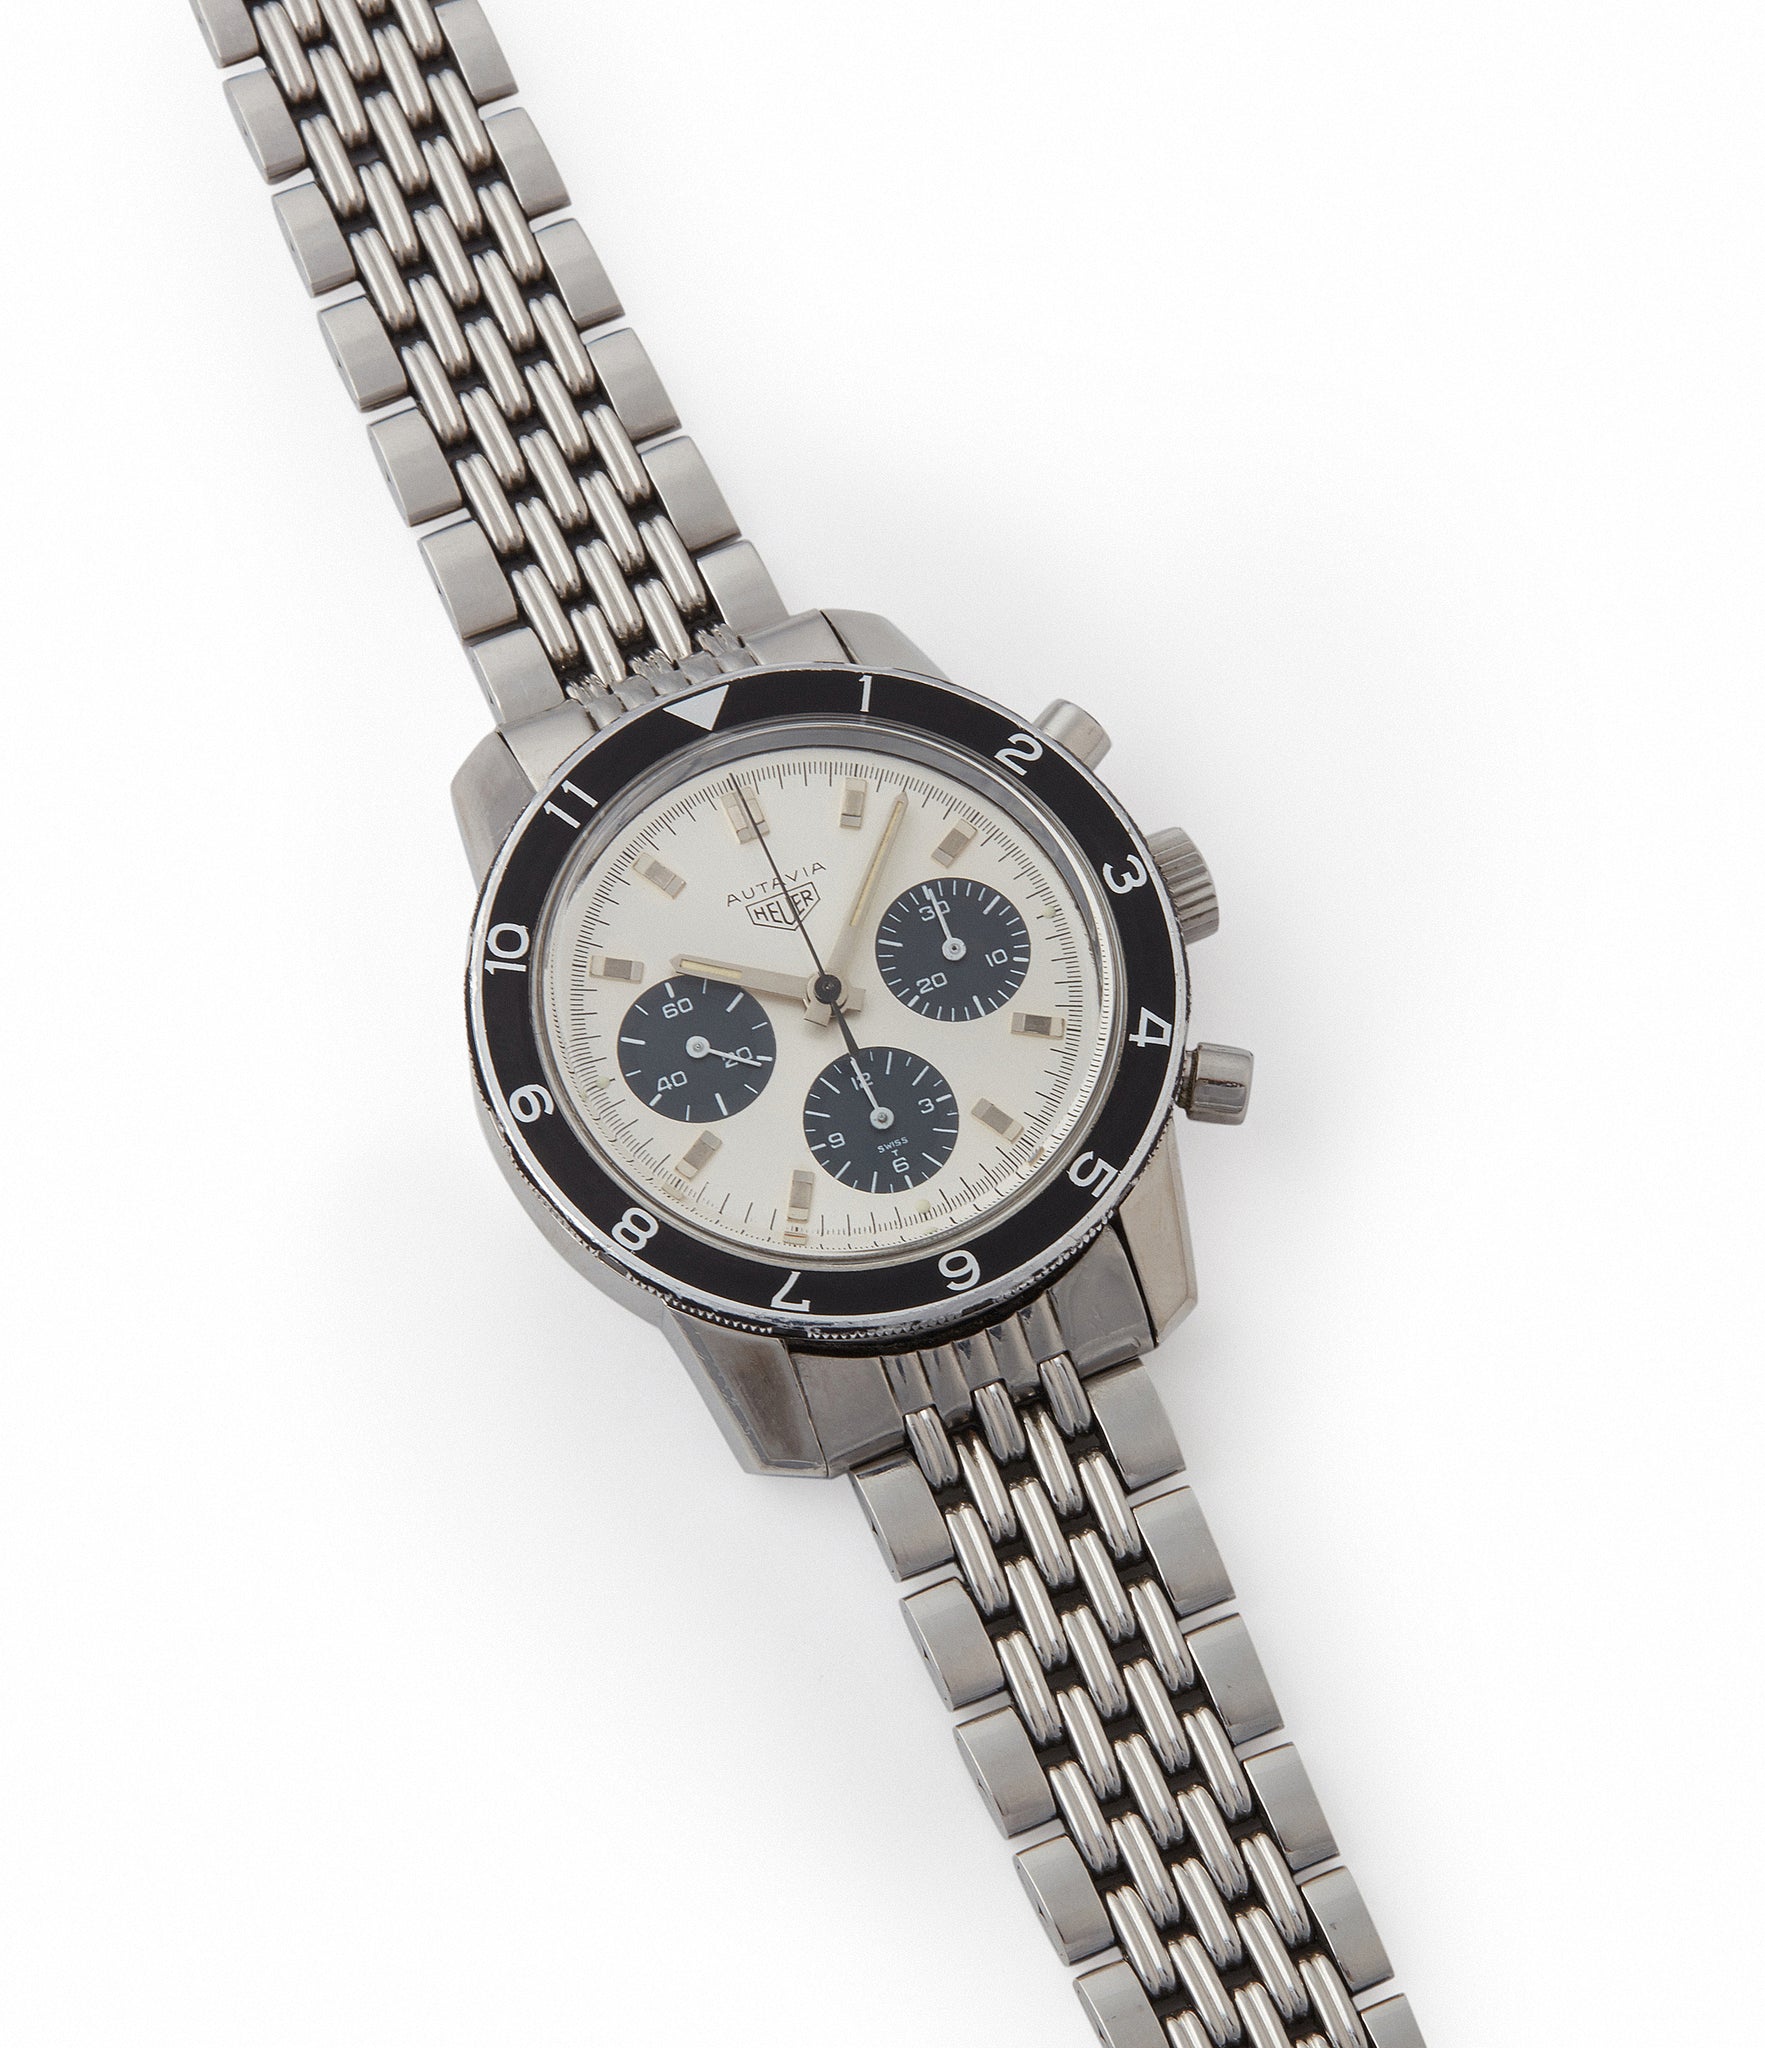 selling vintage Heuer Autavia 2446 C SN silver dial rare chronograph test dial Valjoux 72 watch